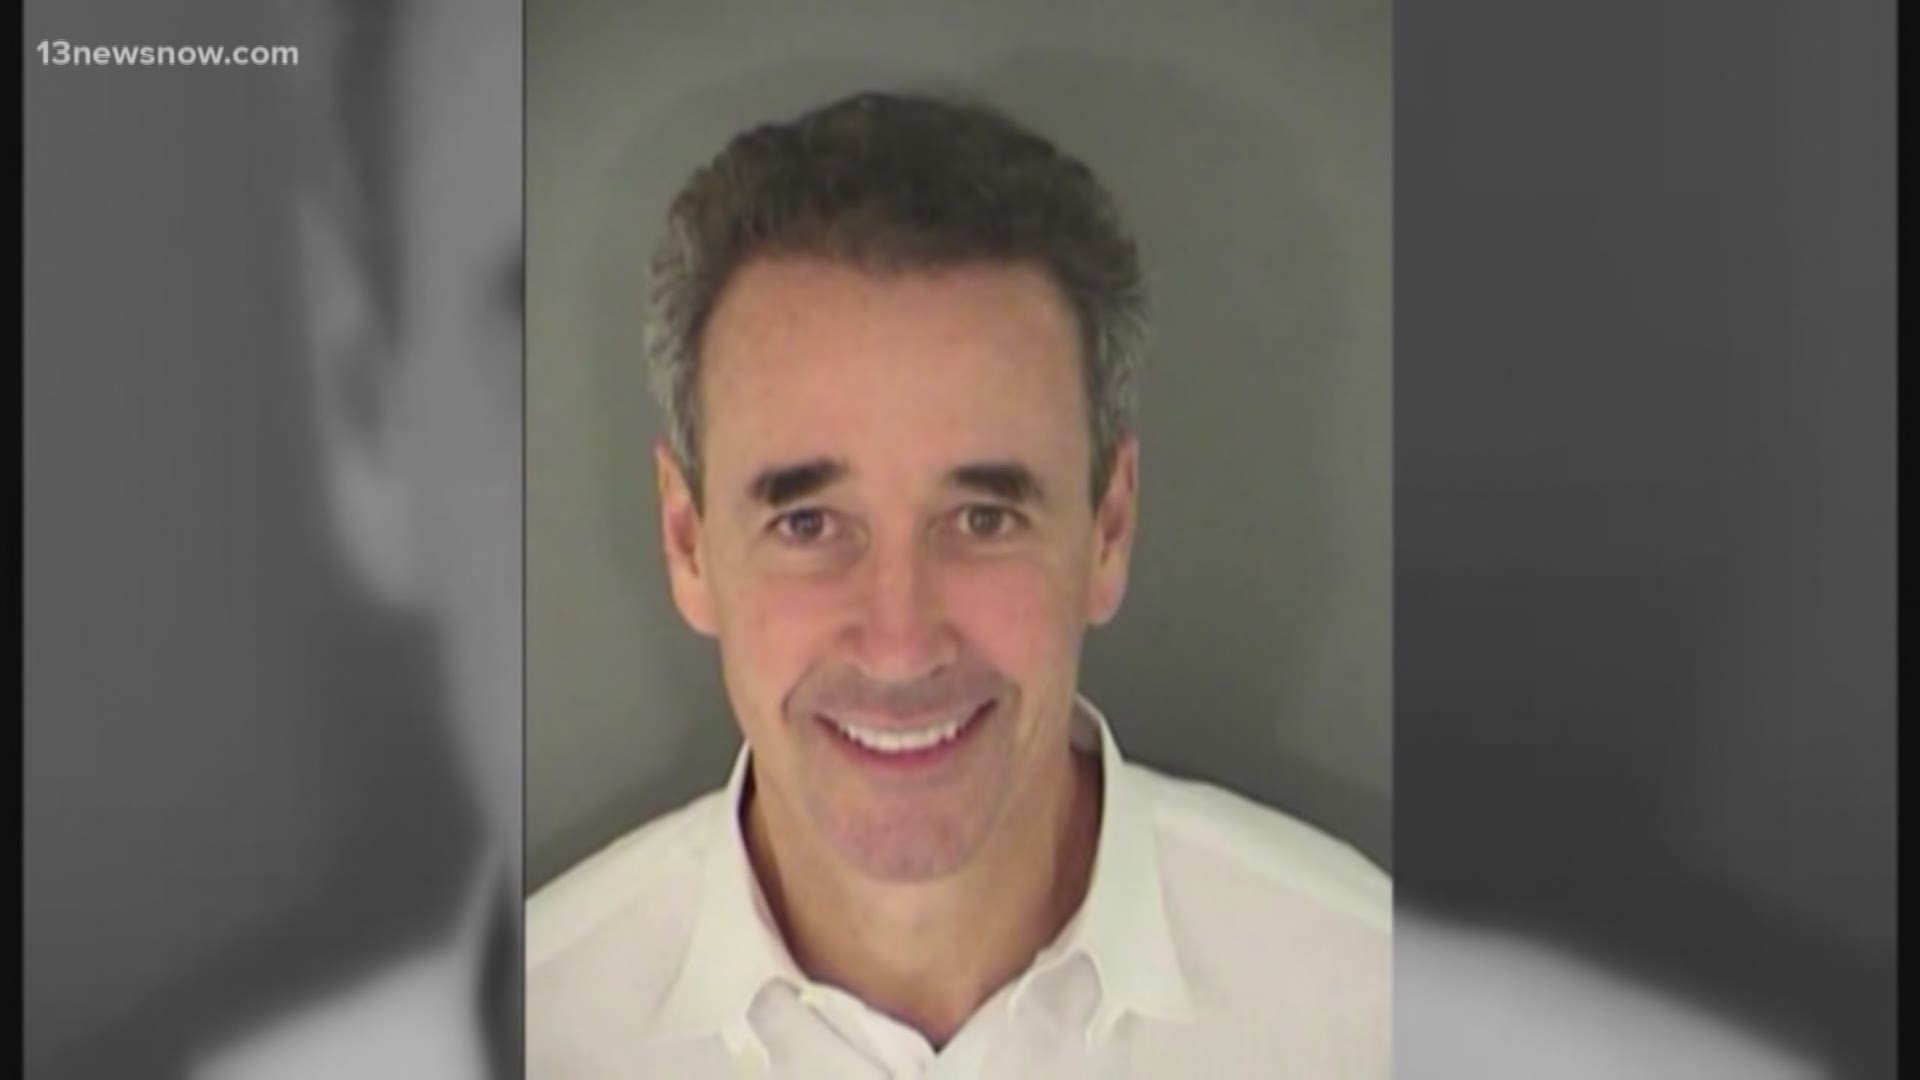 Former Virginia House of Delegates member Joe Morrissey announced that he will be running for a State Senate seat. He submitted an Alford Plea in December 2014 for contributing to the delinquency of a minor.